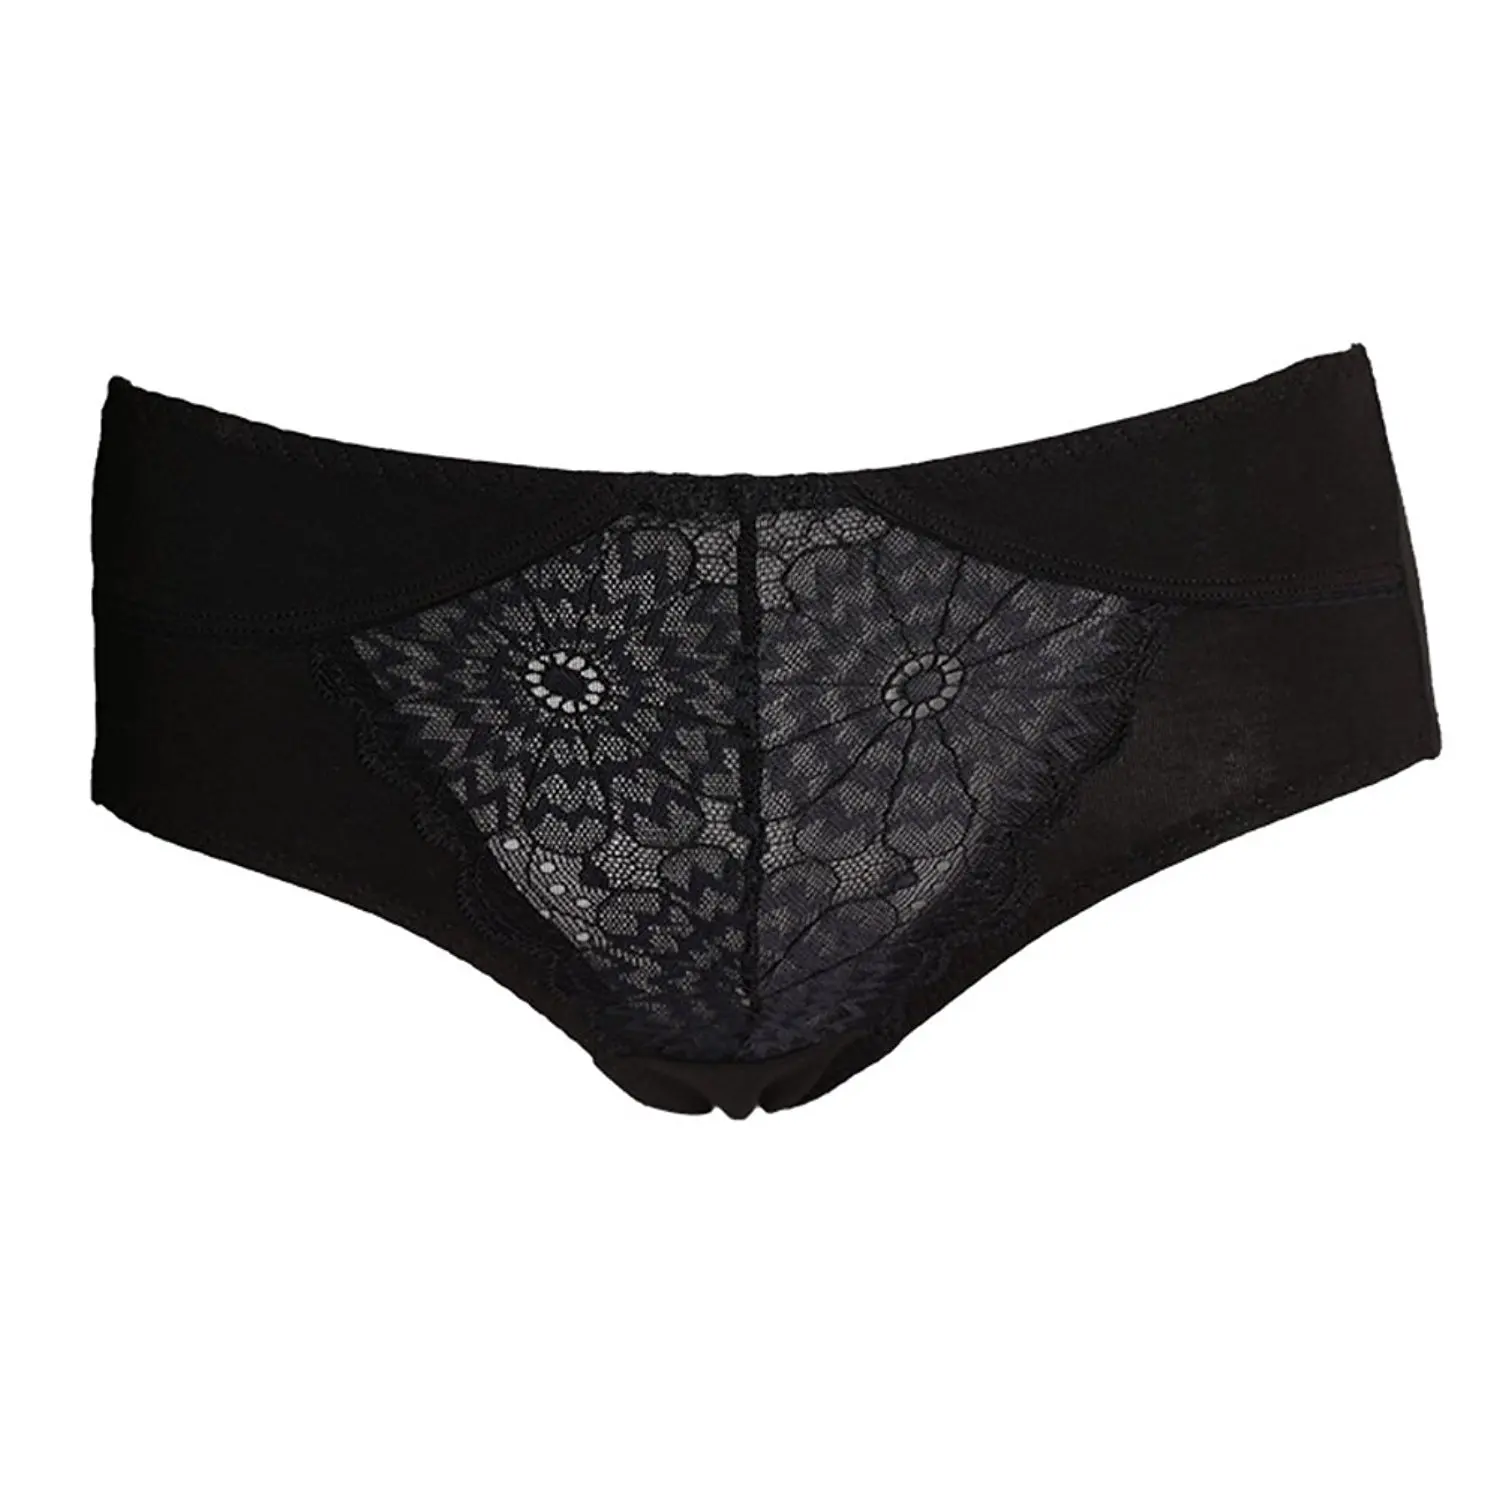 Cheap Sexy Low Rise Panties Find Sexy Low Rise Panties Deals On Line